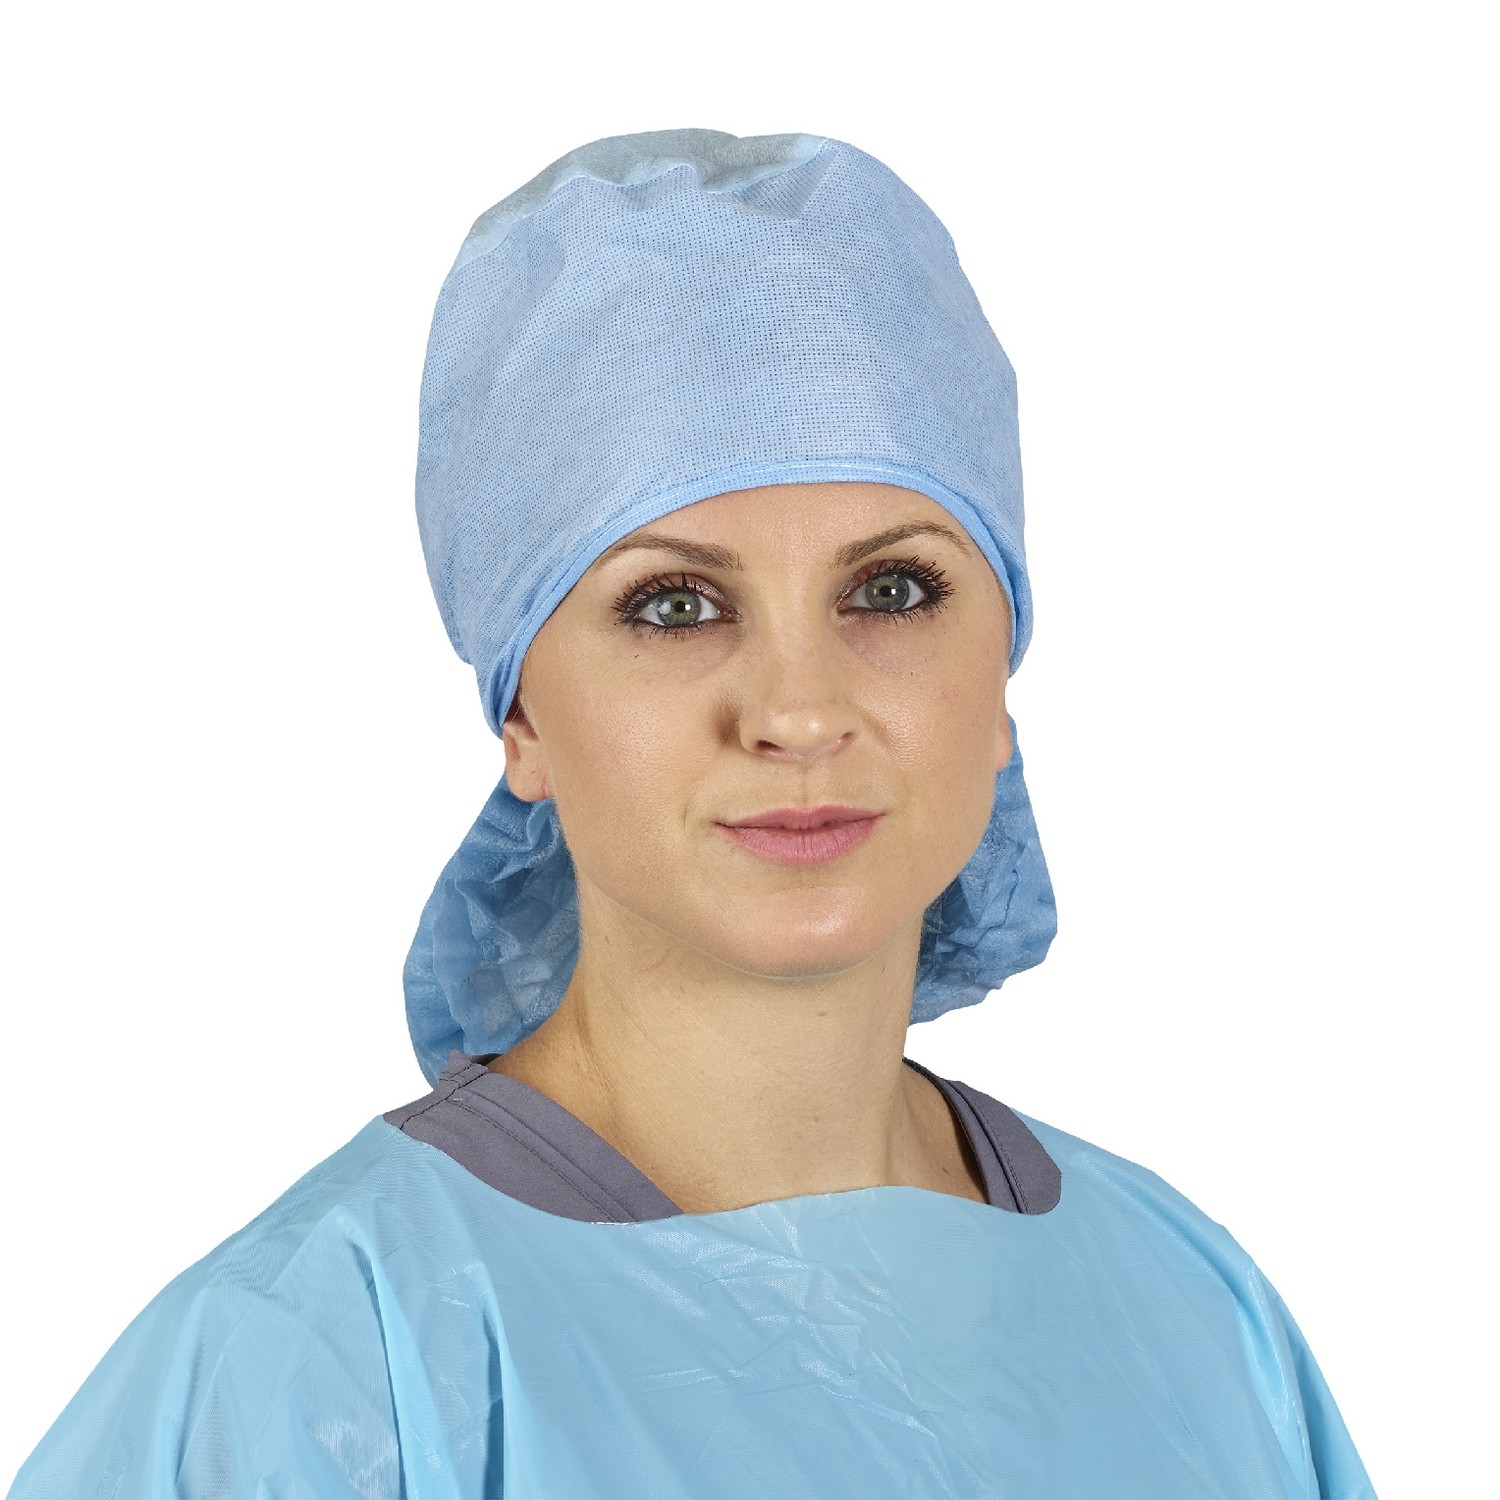 HALYARD* COVER MAX* Surgical Cap with CAPTURE TECHNOLOGY